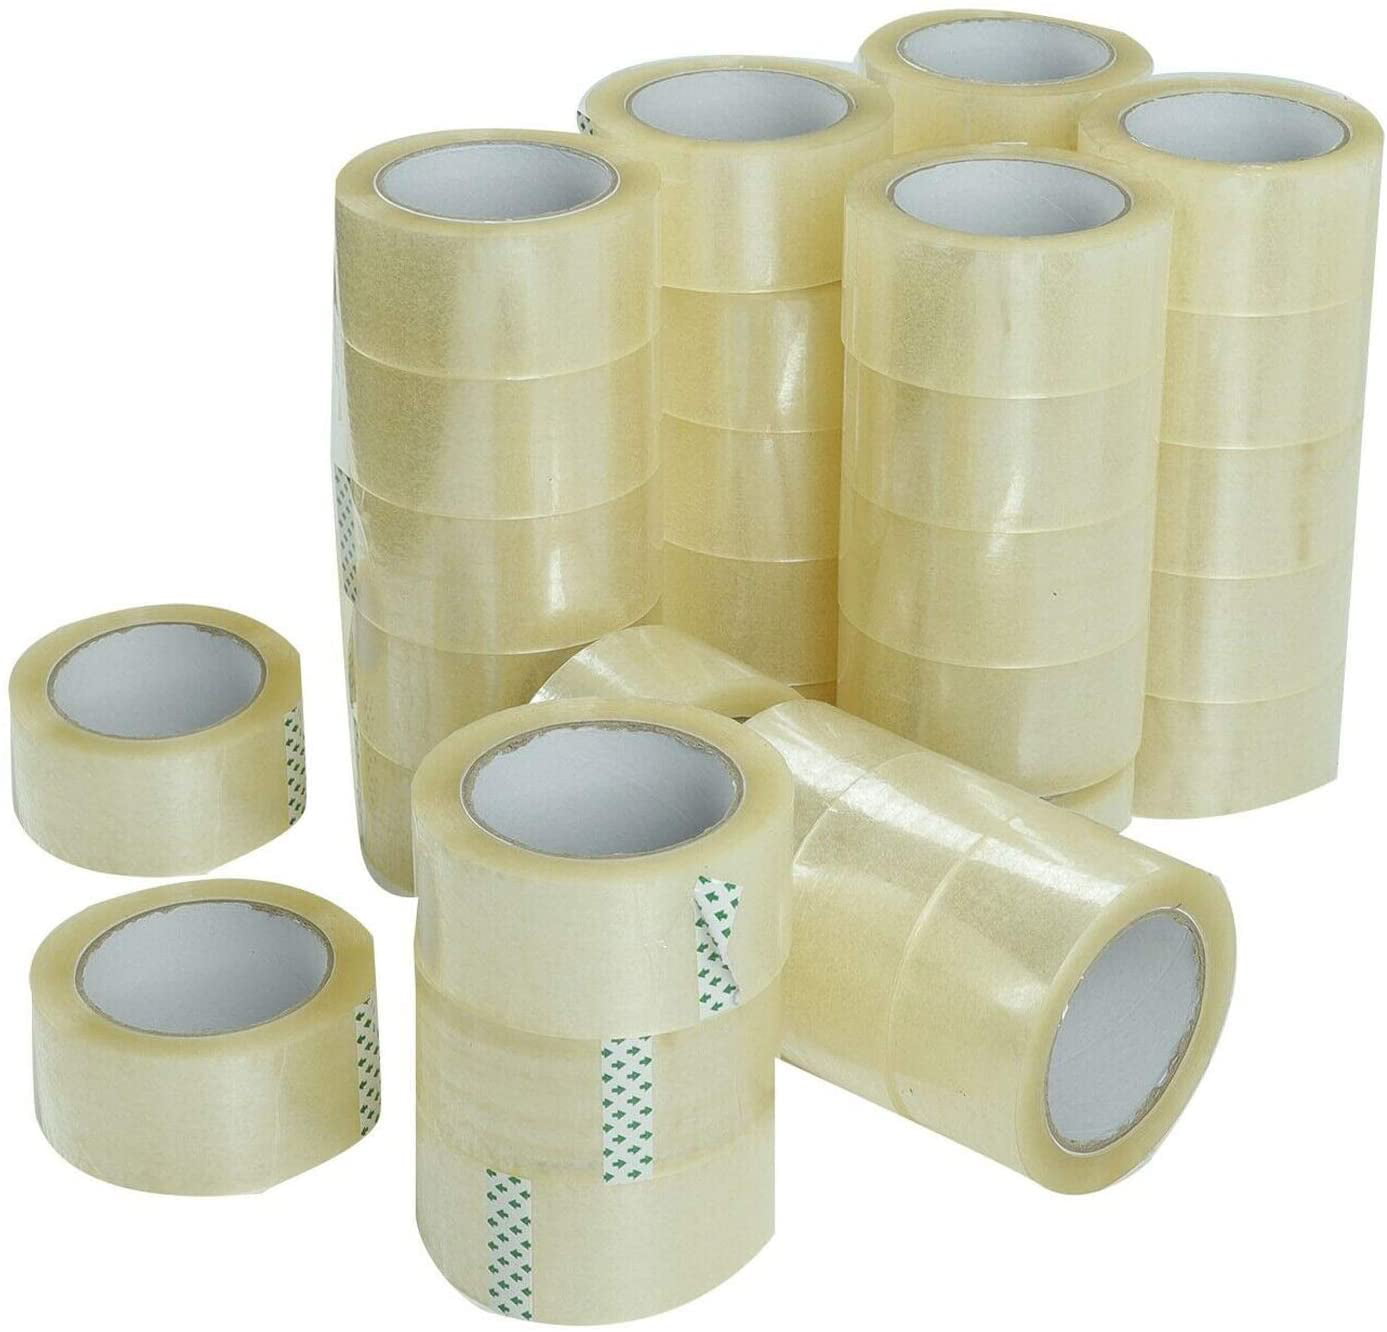 24 ROLLS CLEAR CARTON SEALING PACKING SHIPPING TAPE 3" 2.0 MIL 110 Yards 330' 